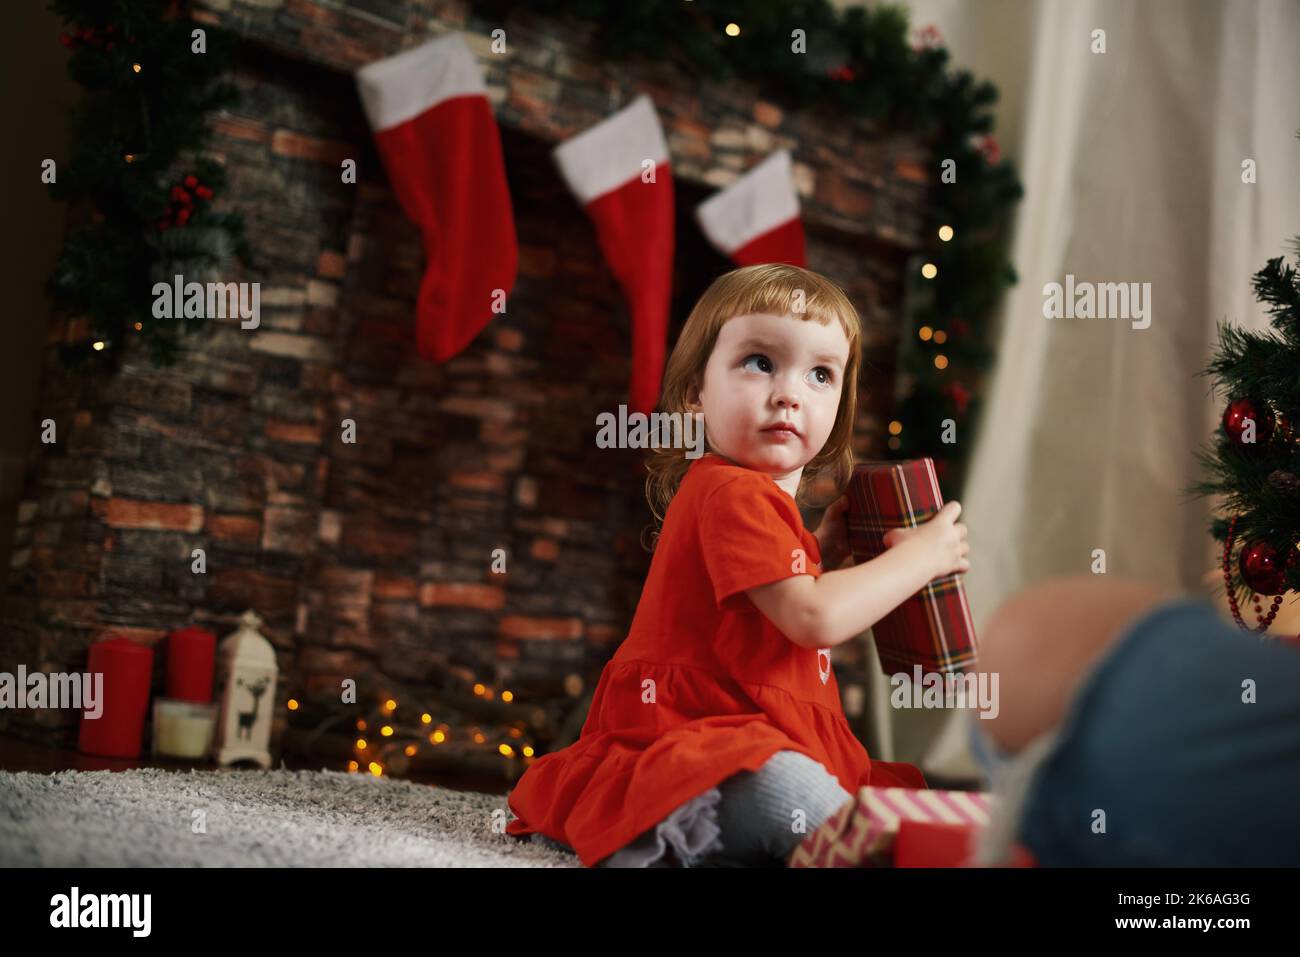 Giving gifts. Little girl with Christmas gifts by the fireplace Stock Photo